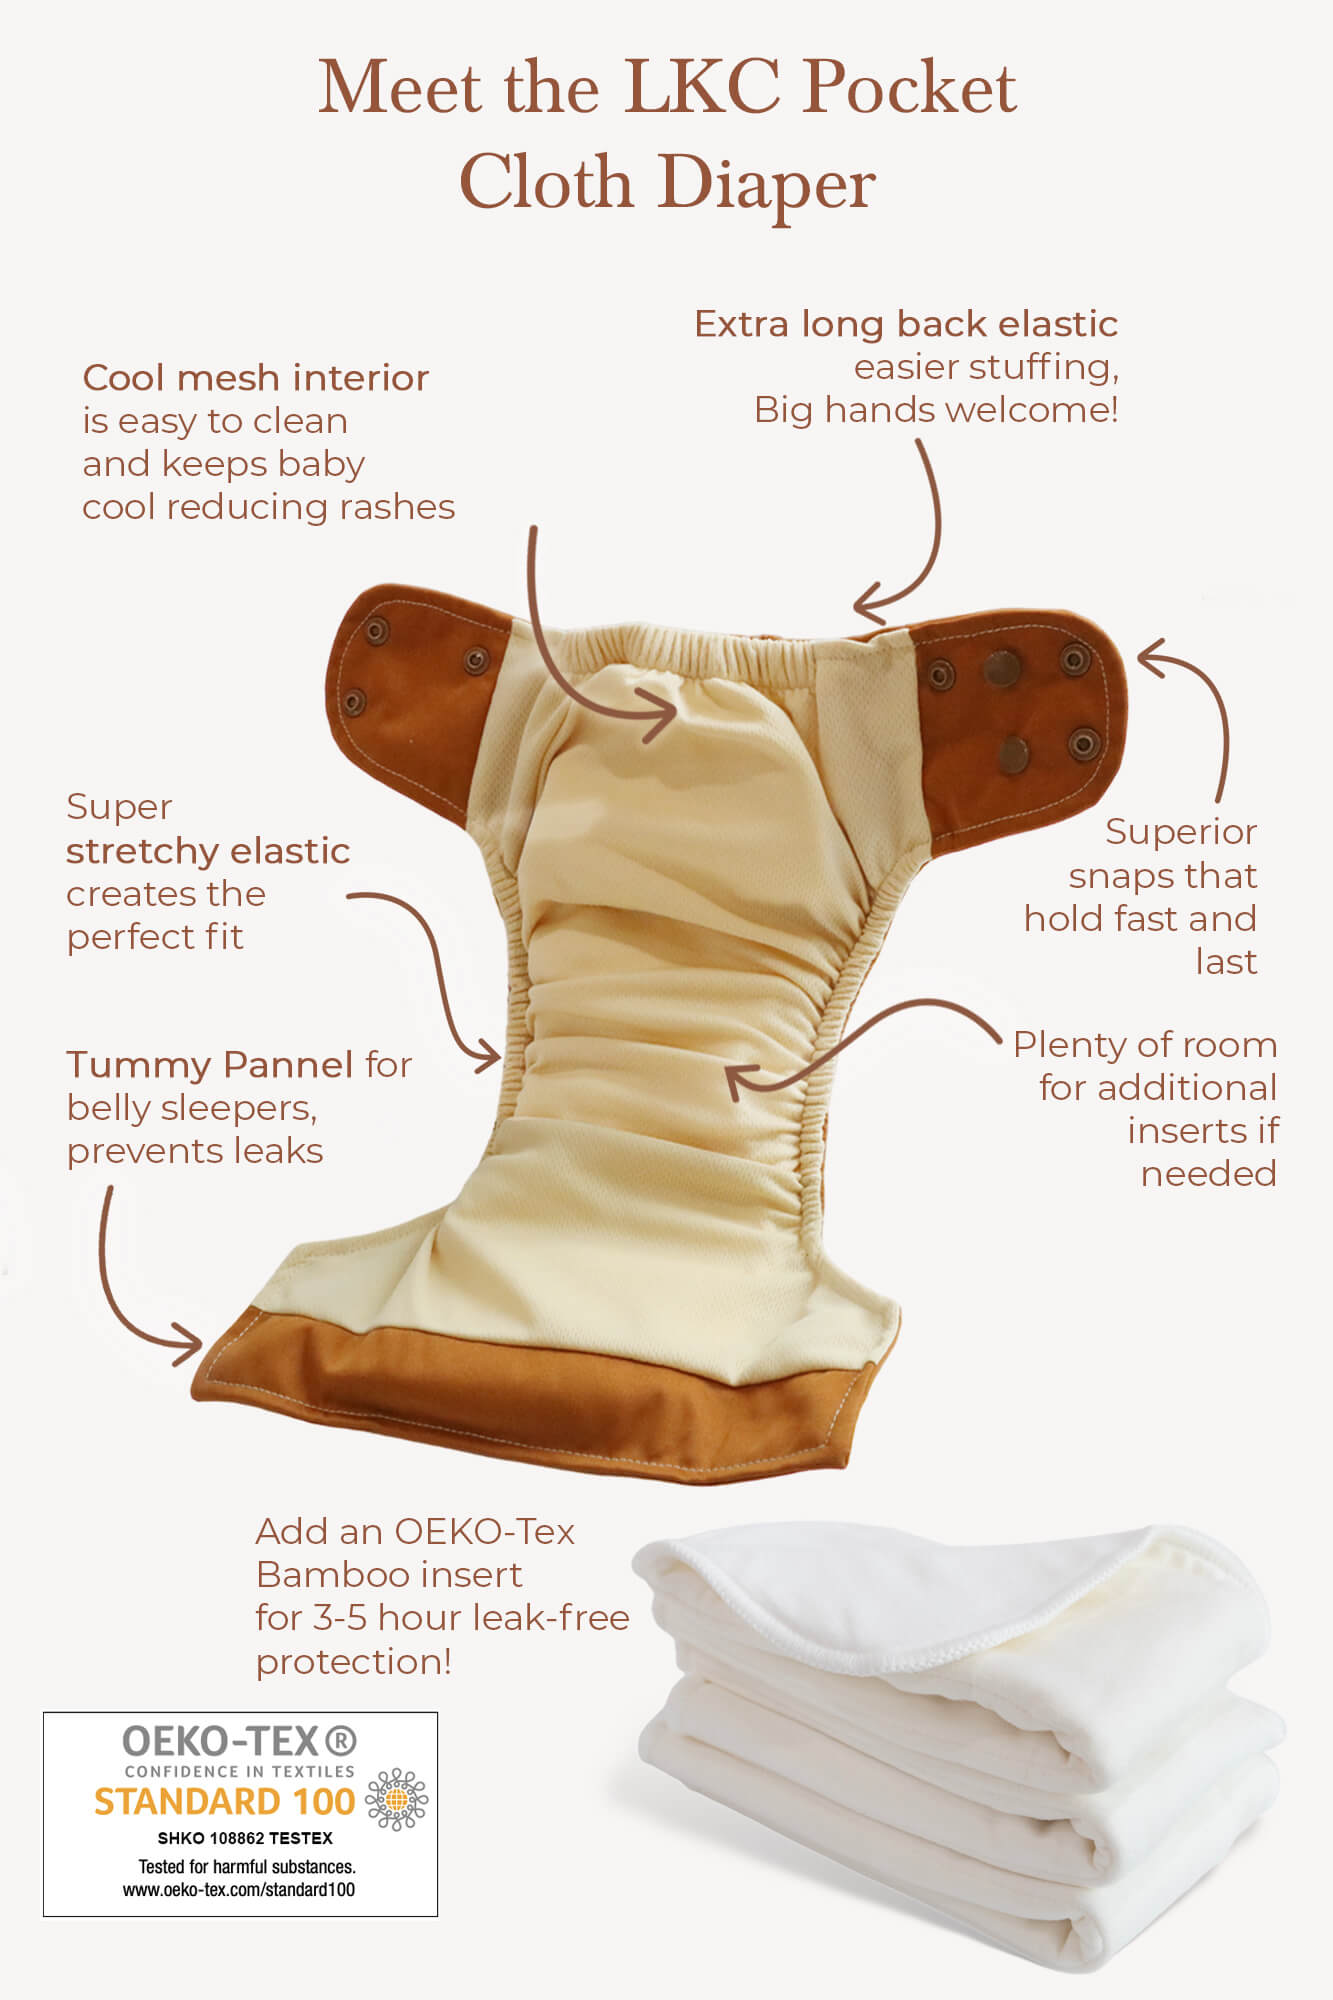 Easy-Stuff Pocket Cloth Diaper - Creambrulle